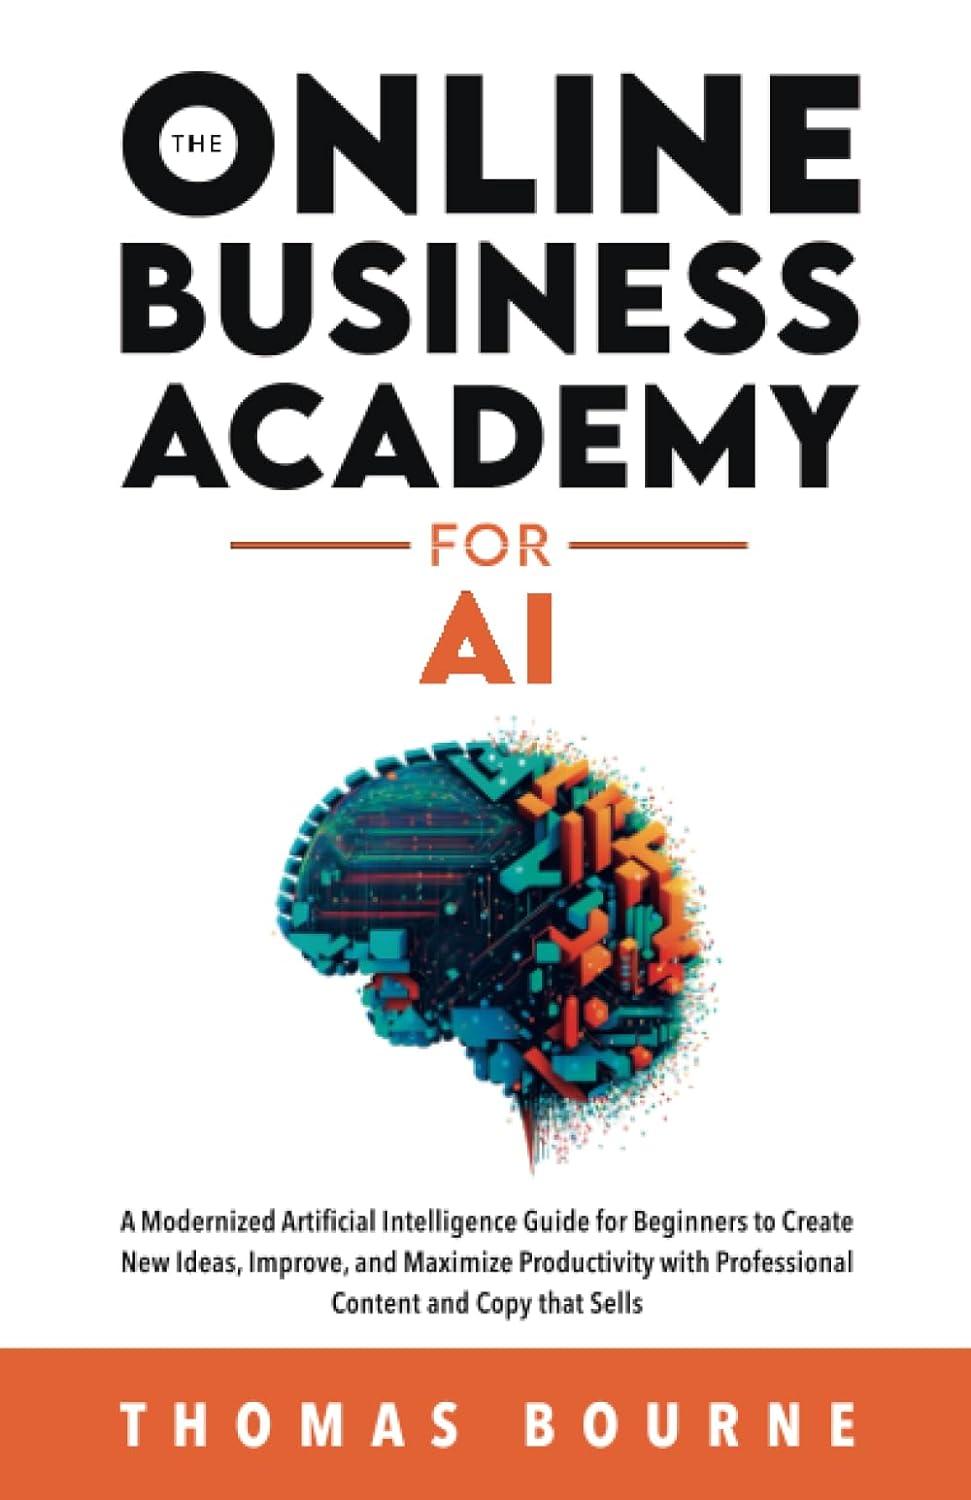 the online business academy for ai a modernized artificial intelligence guide for beginners to create new